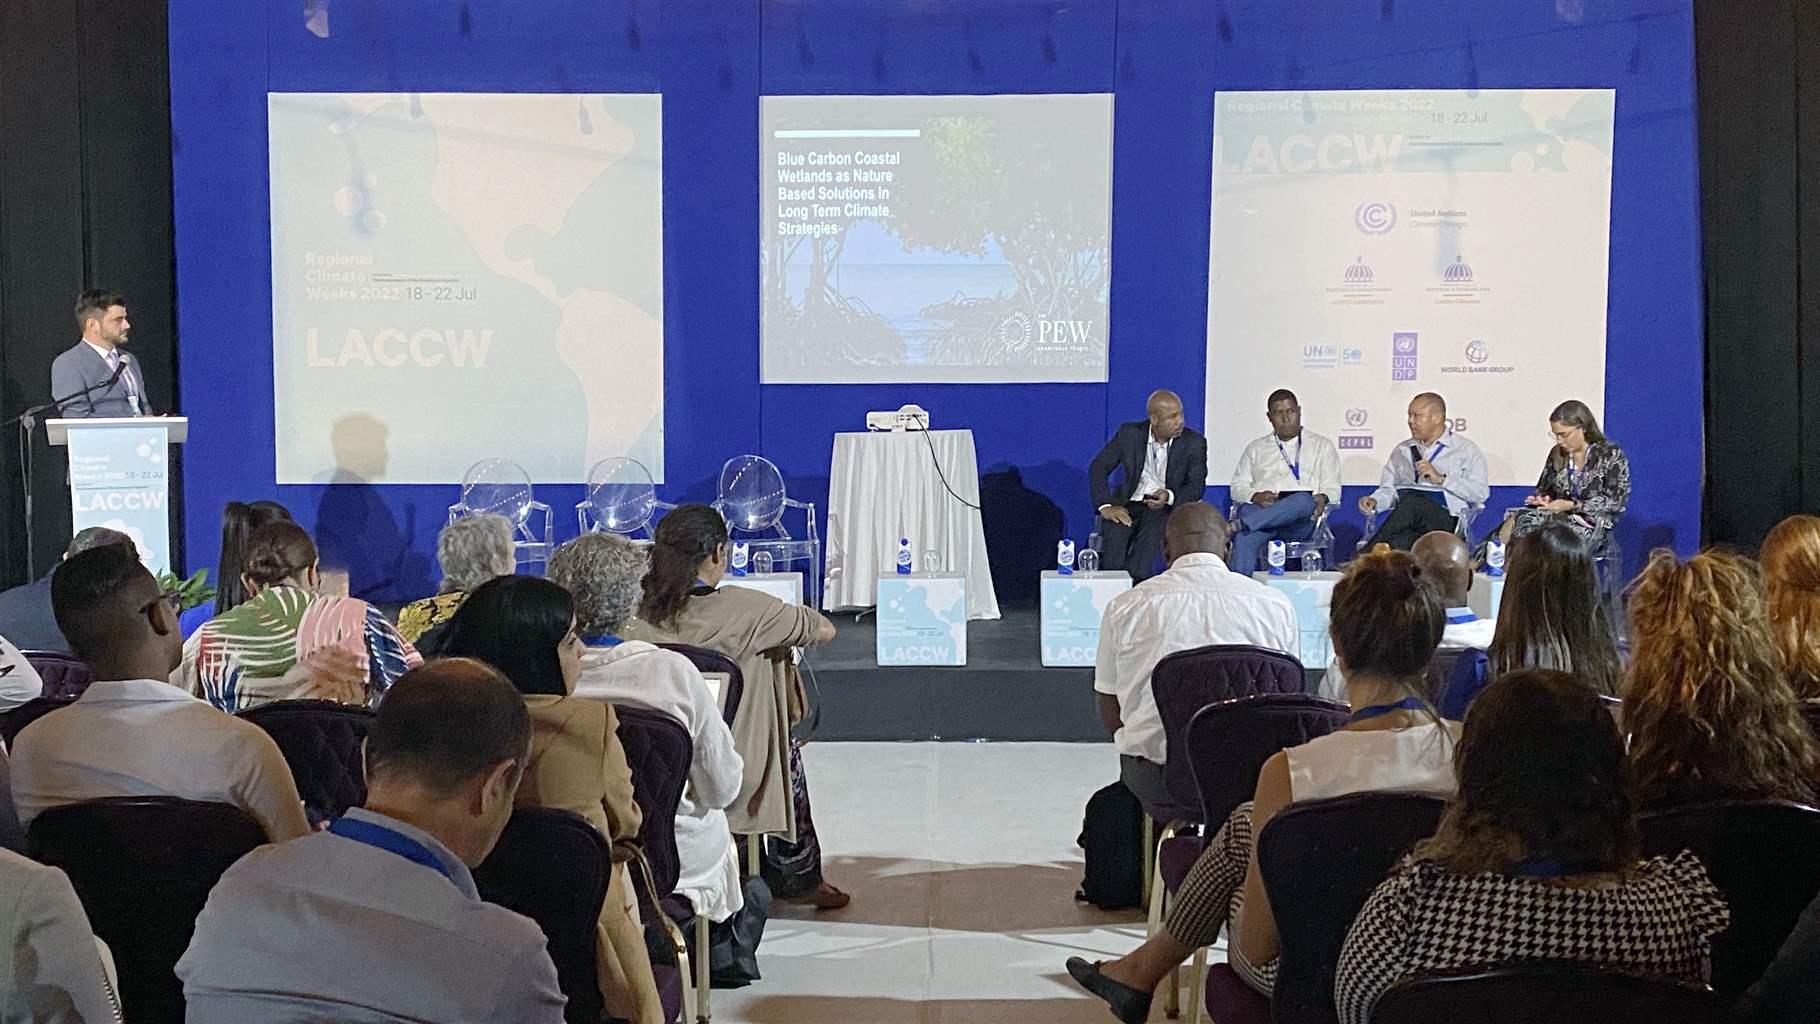 Pew’s Tom Hickey moderates a panel during Latin America and Caribbean Climate Week in Belize focused on blue carbon coastal wetlands, featuring panelists: Colin Young (5Cs), Dr. Kendrick Williams (Belize), Bienvenido Santana (Dominican Republic), and Gabriela Márquez (translator).